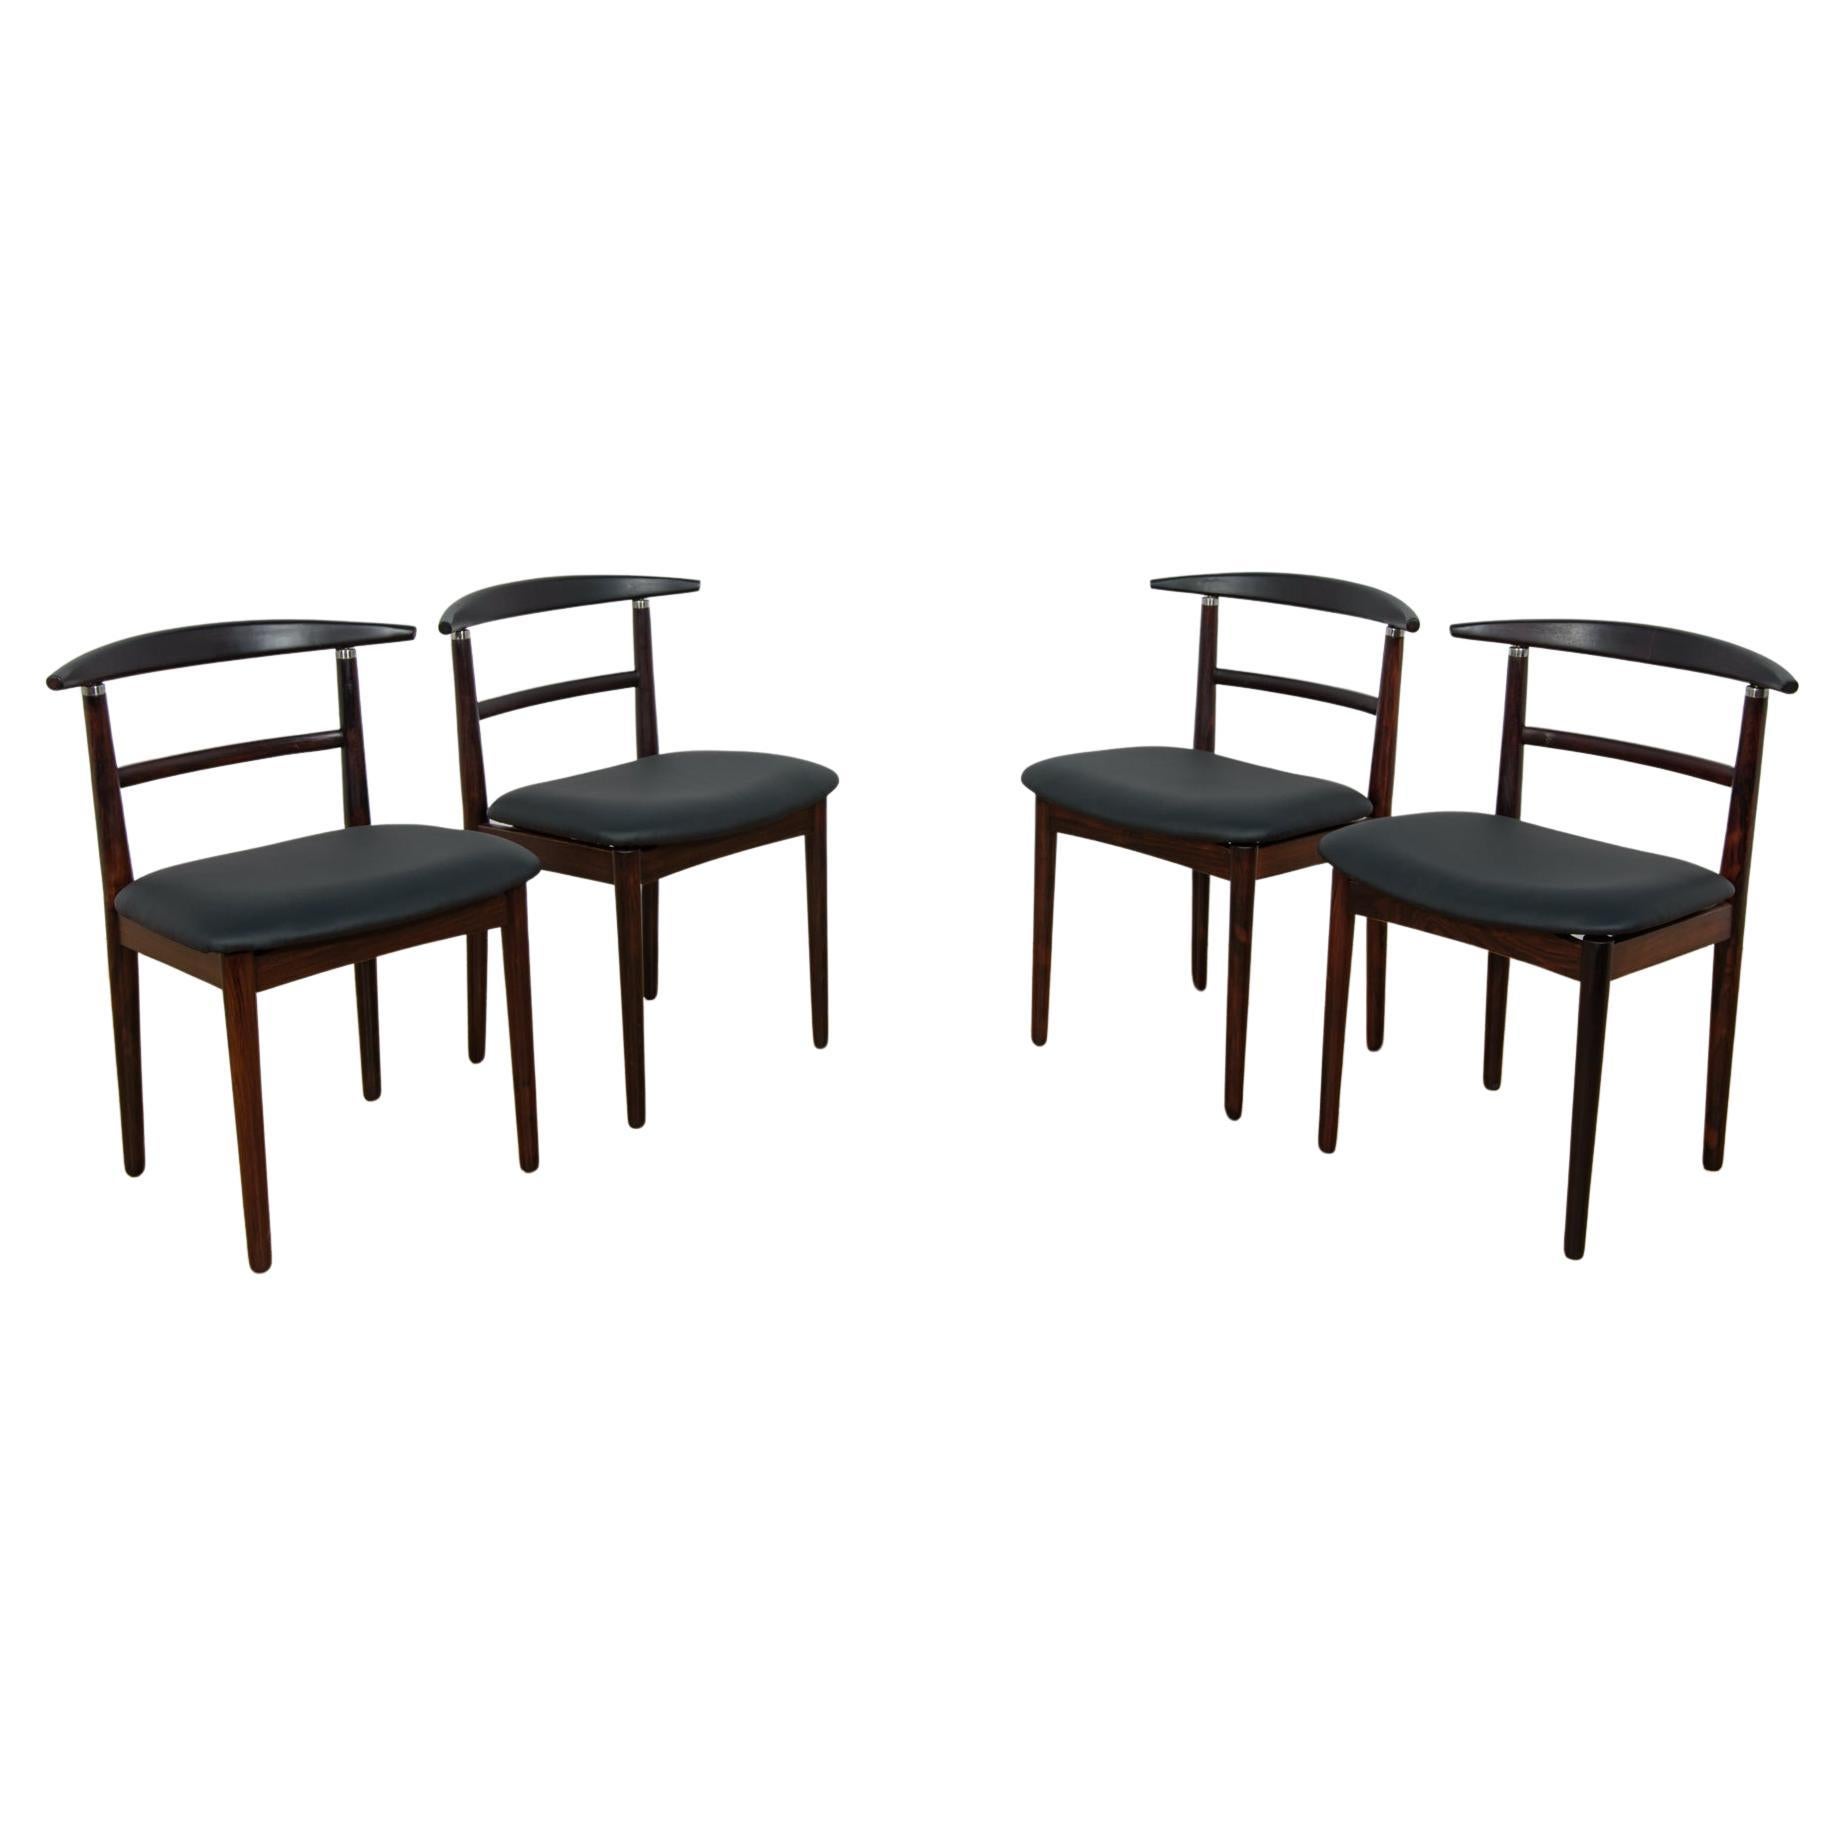 Rosewood Dining Chairs by Helge Sibast & Børge Rammerskov, Denmark, 1960s. For Sale